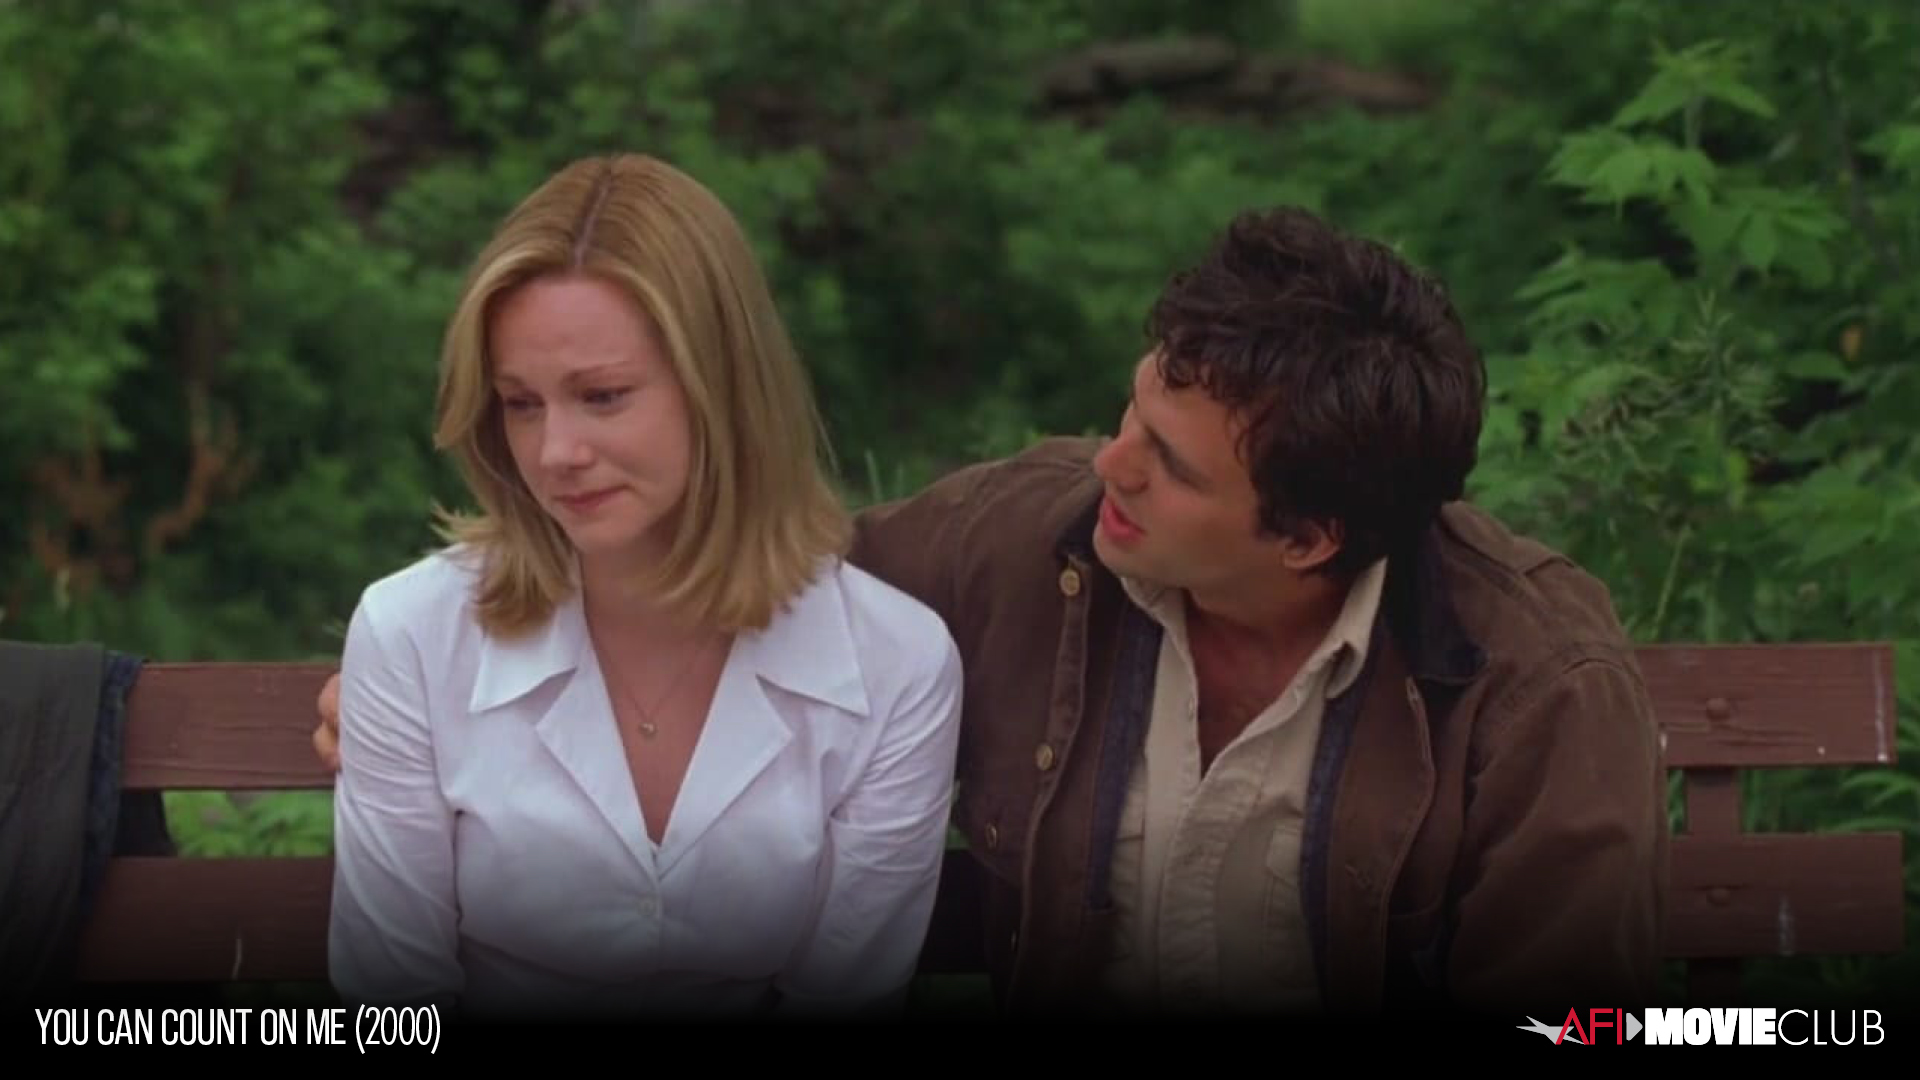 You Can Count On Me Film Still - Laura Linney and Mark Ruffalo